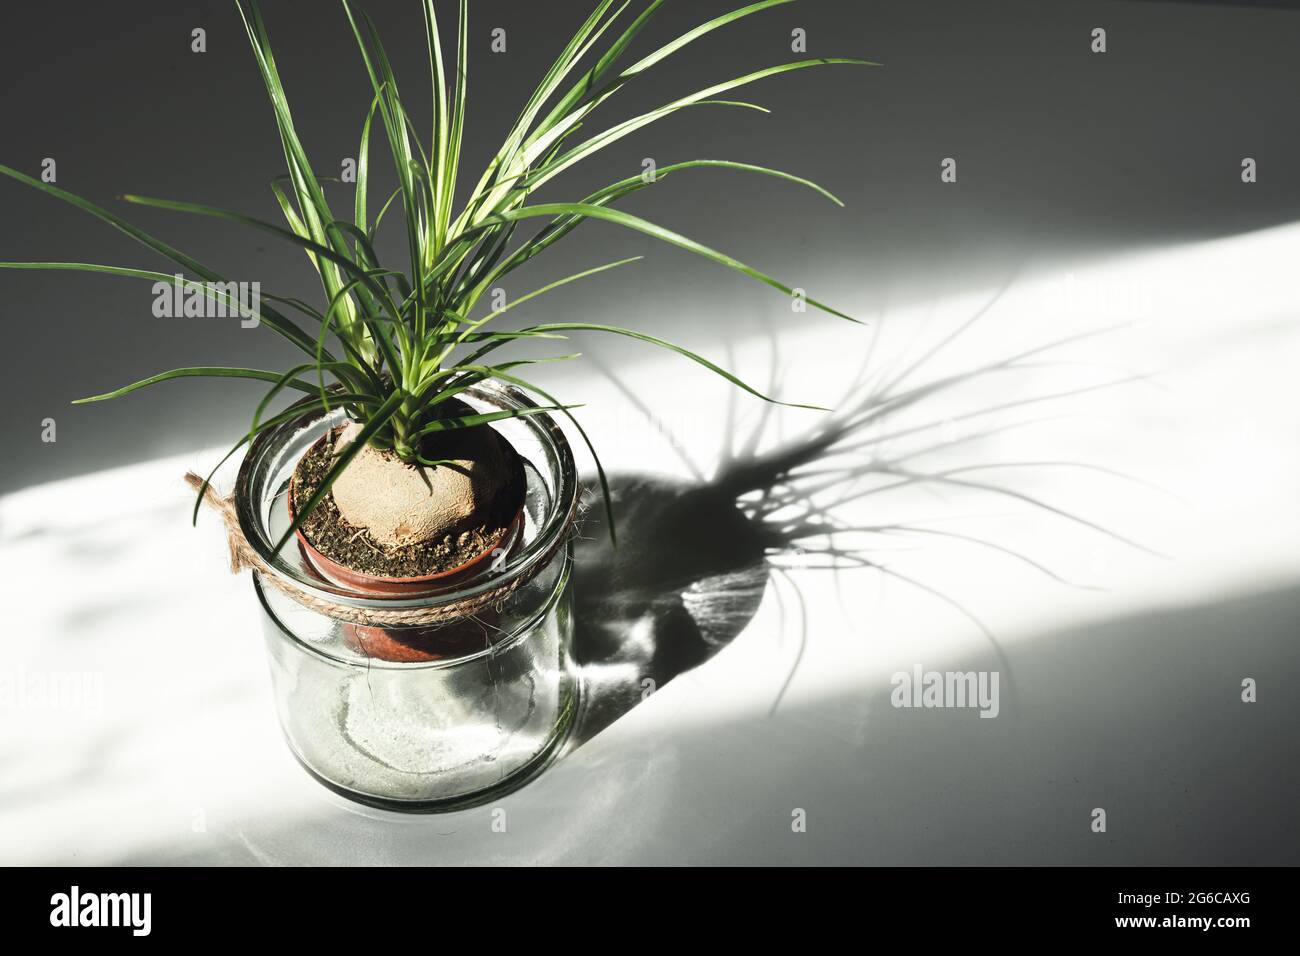 Plant of beaucarnea recurvata in glass jar on the white table in daylight Stock Photo